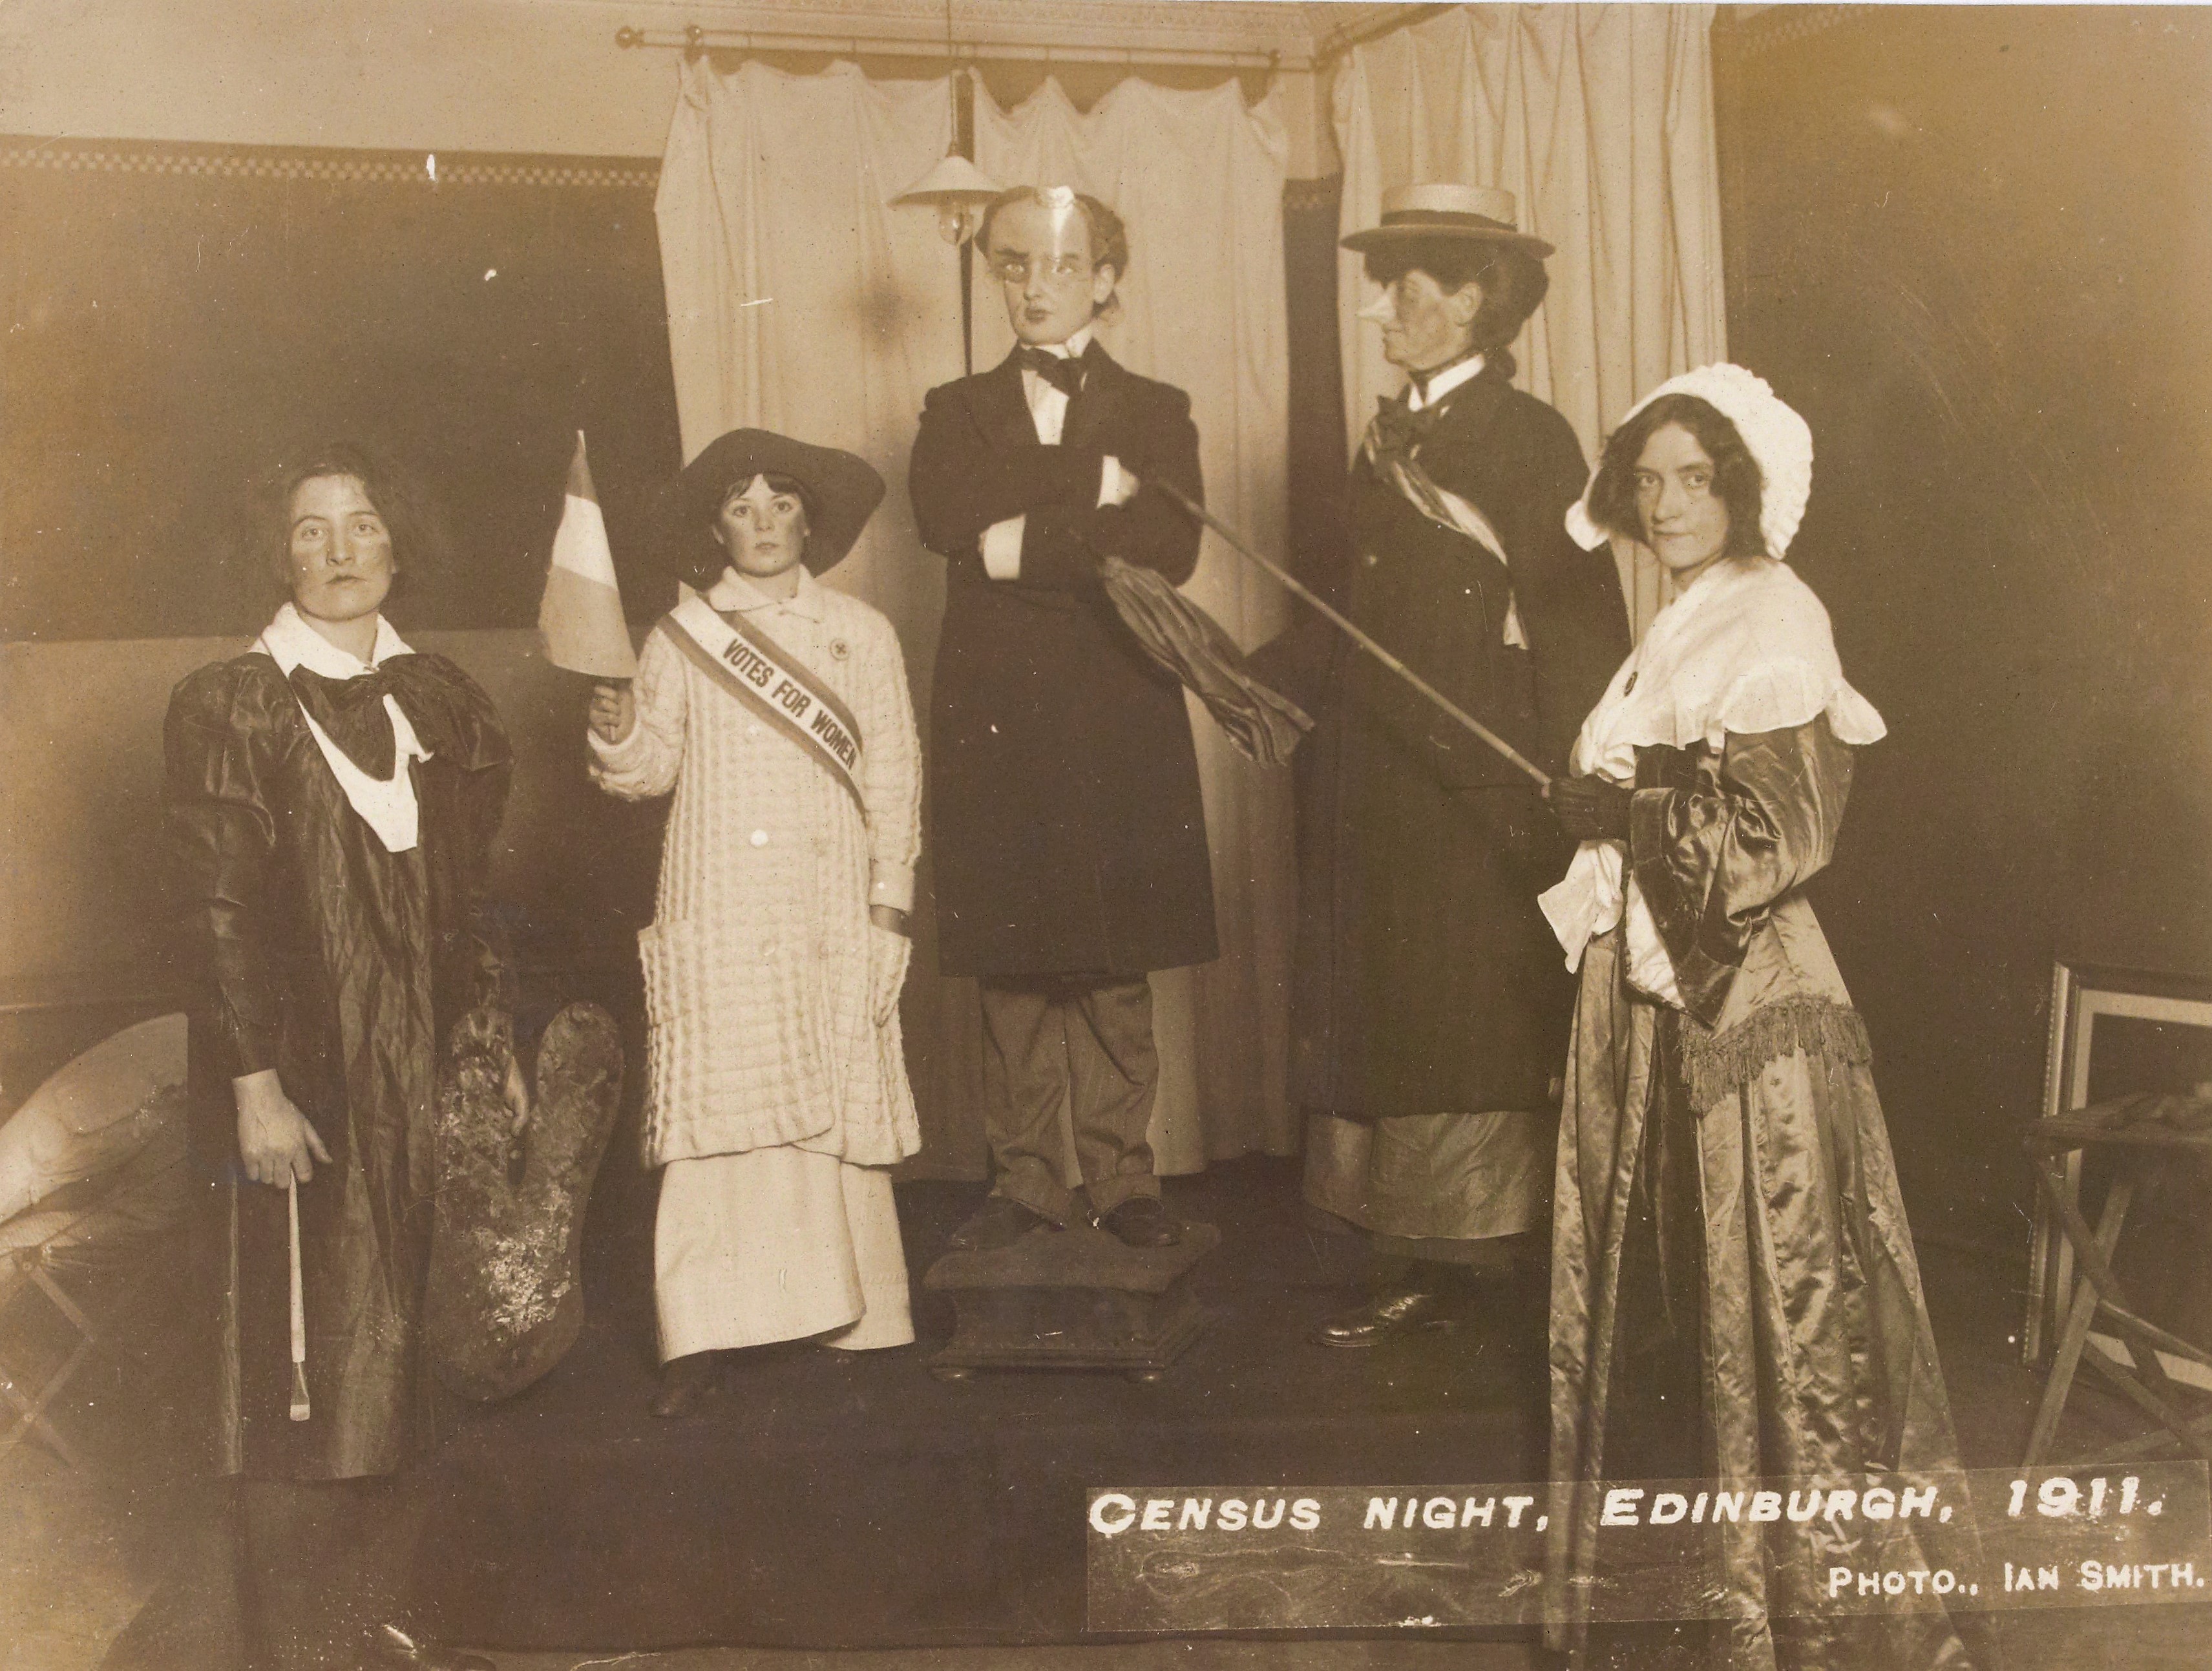 Photograph of several suffragettes on census night, 1911